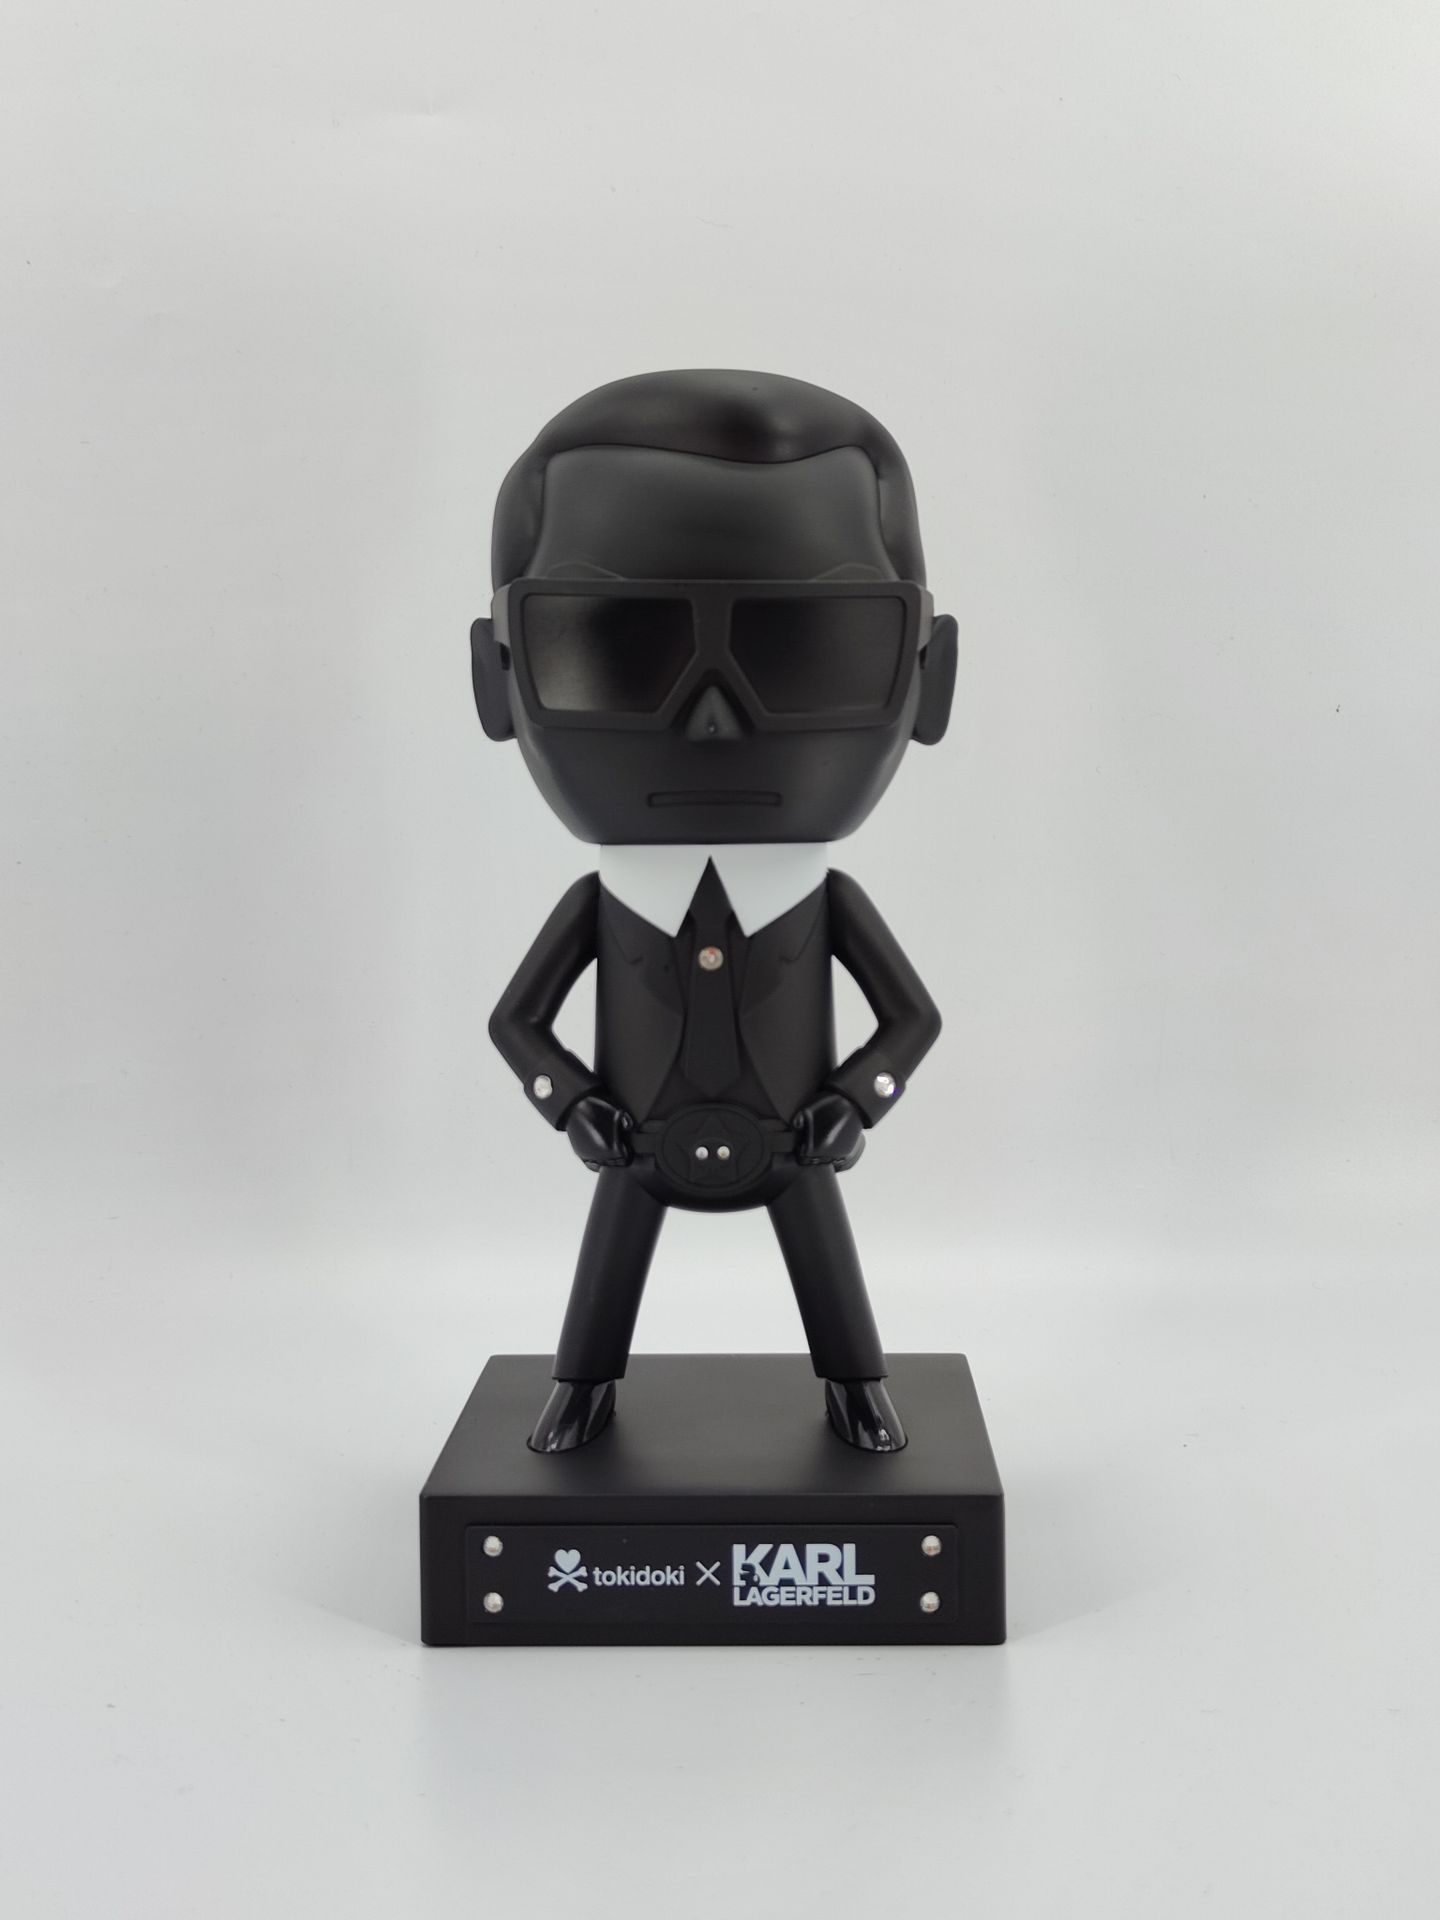 Null Tokidoki X Karl Lagerfeld.
Mr Black and White.
With authenticity card, numb&hellip;